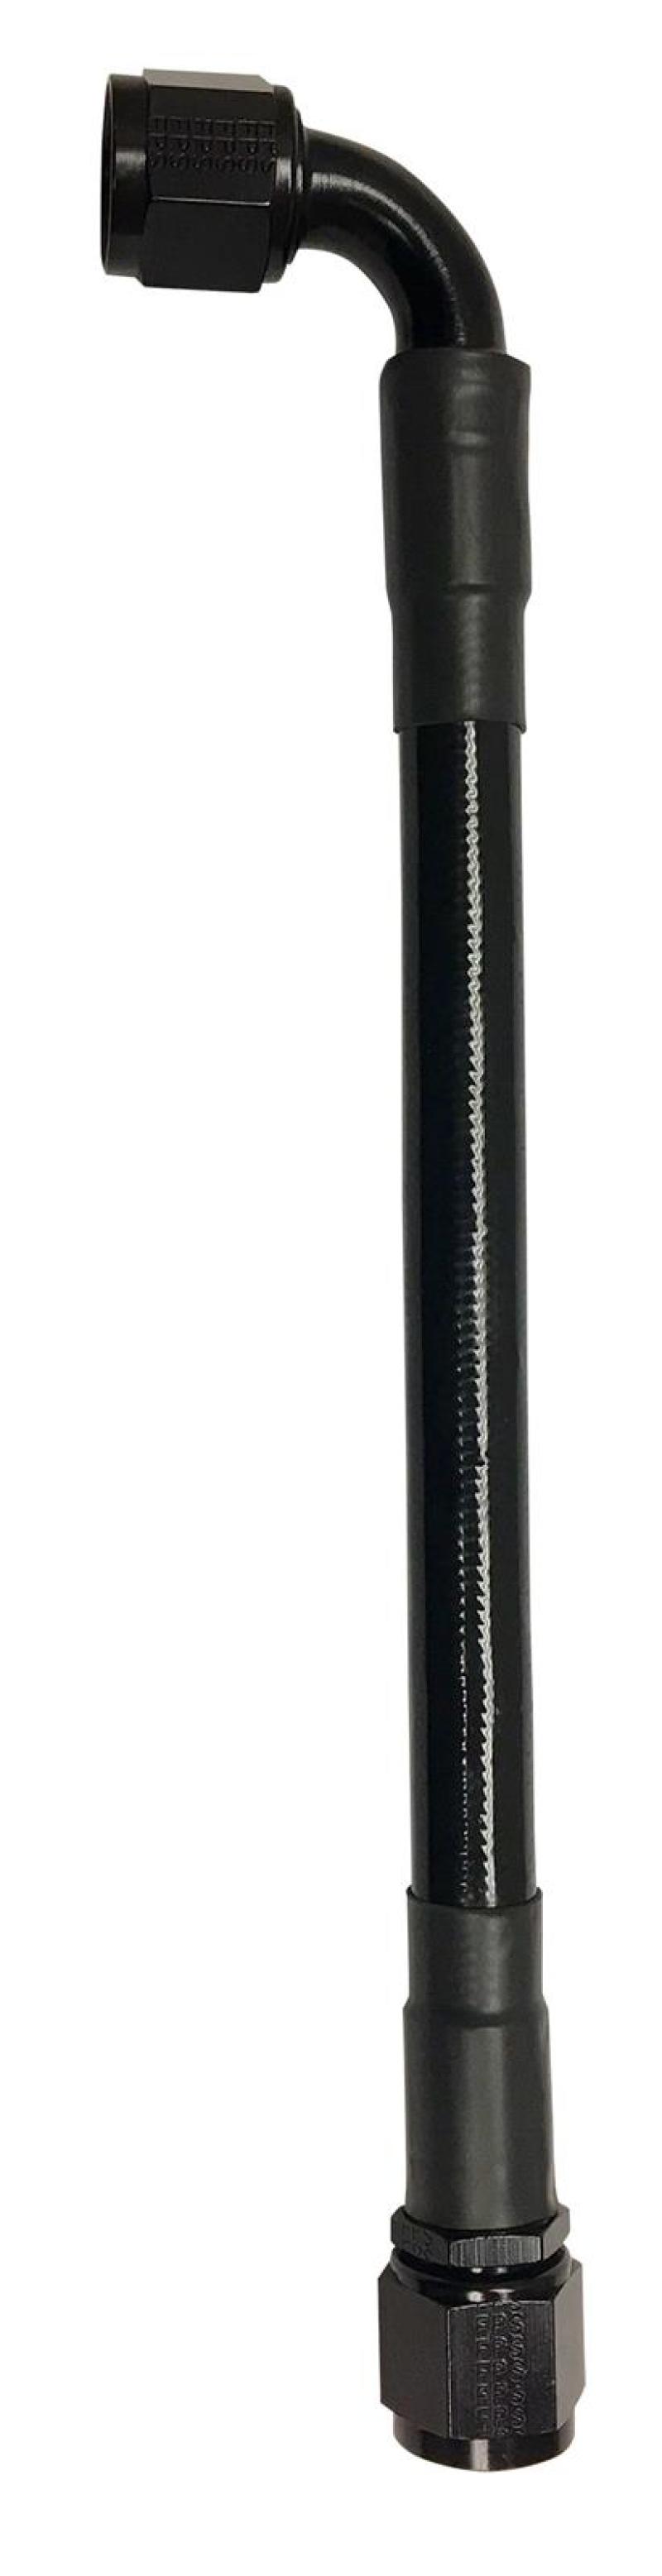 Fragola -10AN Ext Black PTFE Hose Assembly Straight x 90 Degree 36in - 6029-1-2-36BL